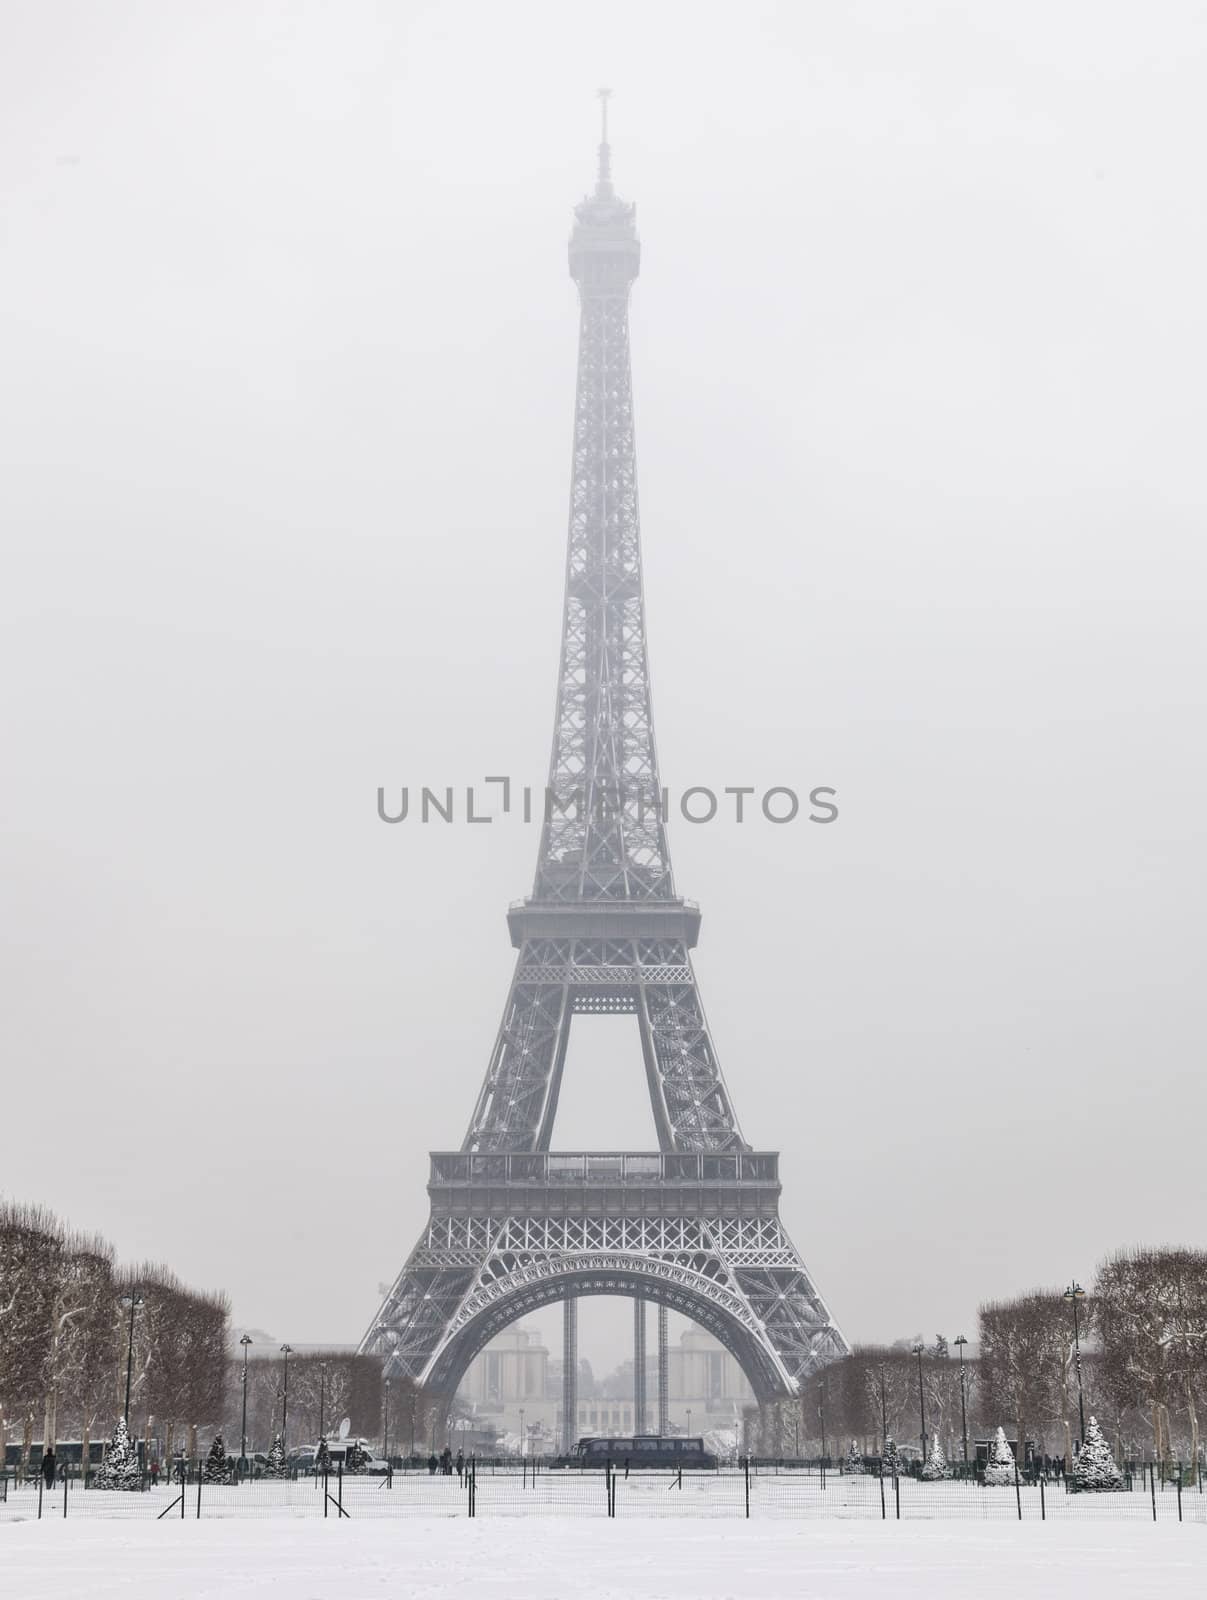  Image of the Eiffel Tower from Champs de Mars after the first night snowfall of the year in Paris.